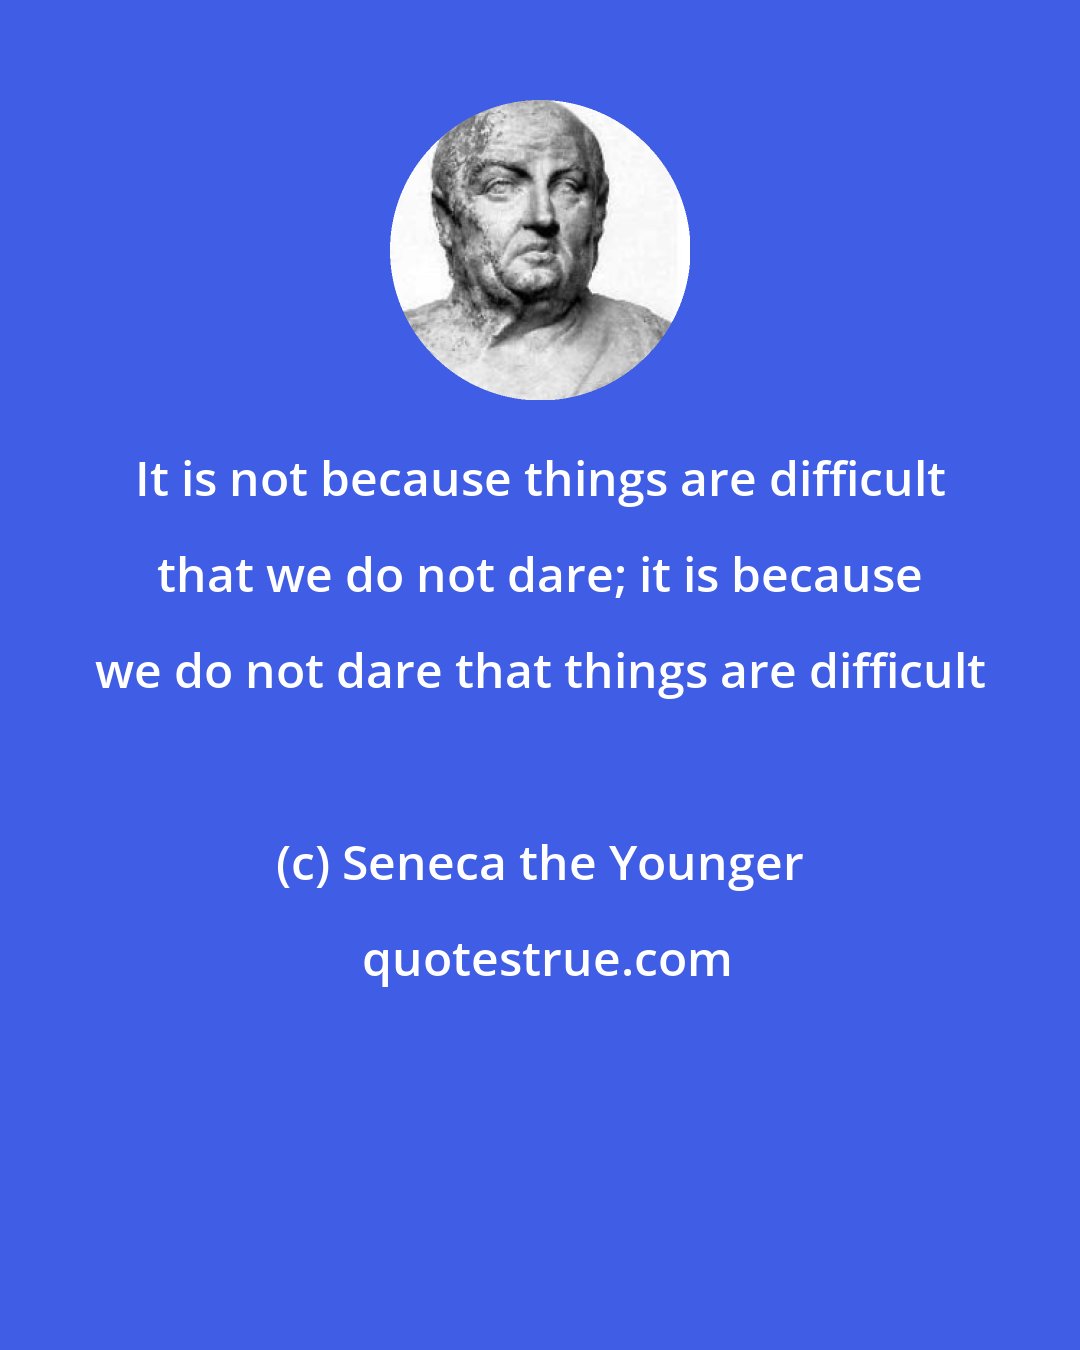 Seneca the Younger: It is not because things are difficult that we do not dare; it is because we do not dare that things are difficult